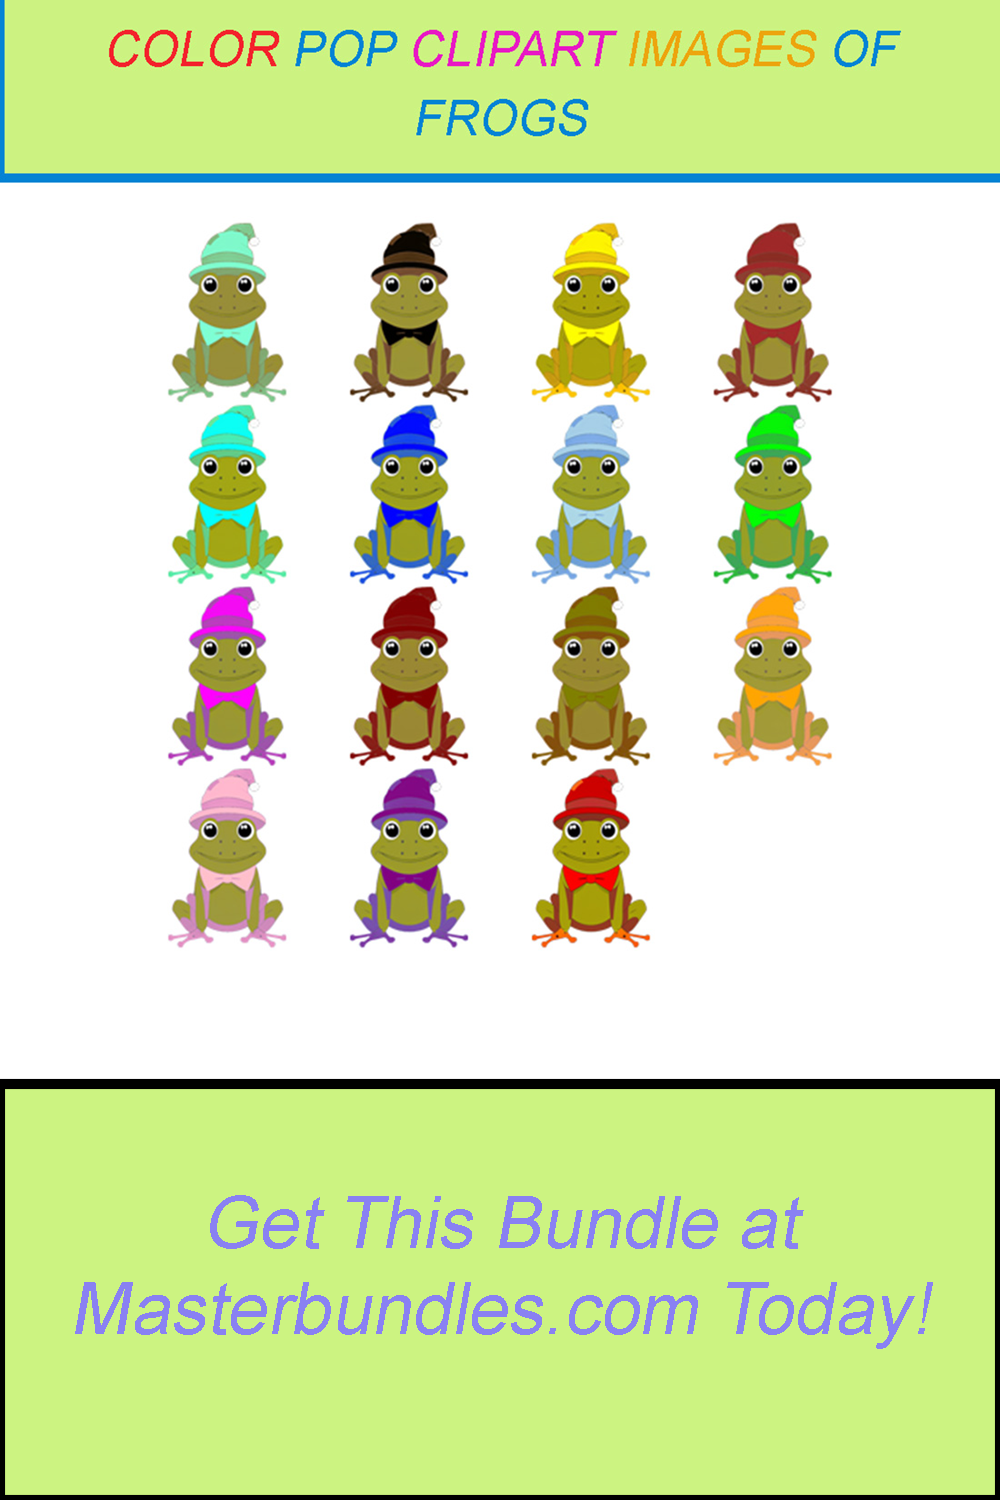 15 COLOR POP CLIPART IMAGES OF FROGS pinterest preview image.